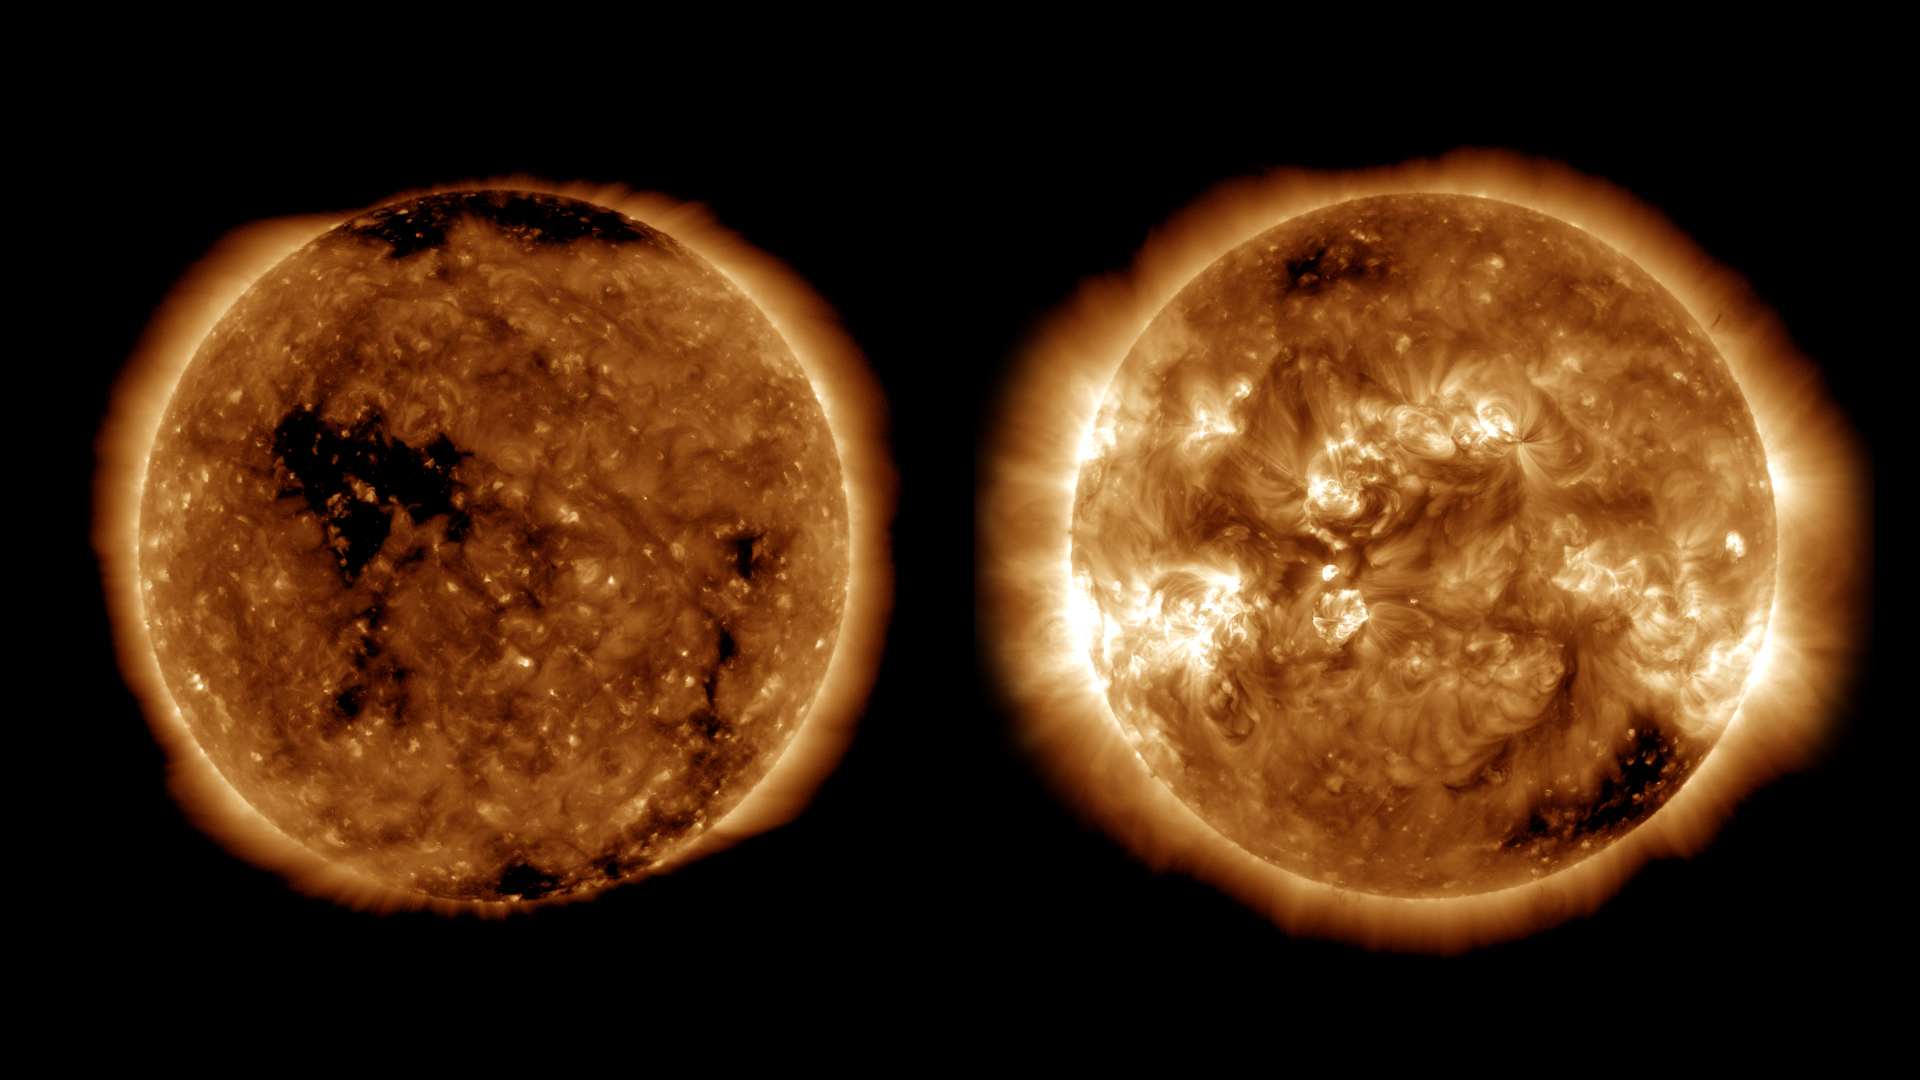 Two satellite images of the Sun appear side by side. On the left, the Sun features a few dark patches. On the right, the Sun displays many bright regions and a couple of dark patches.